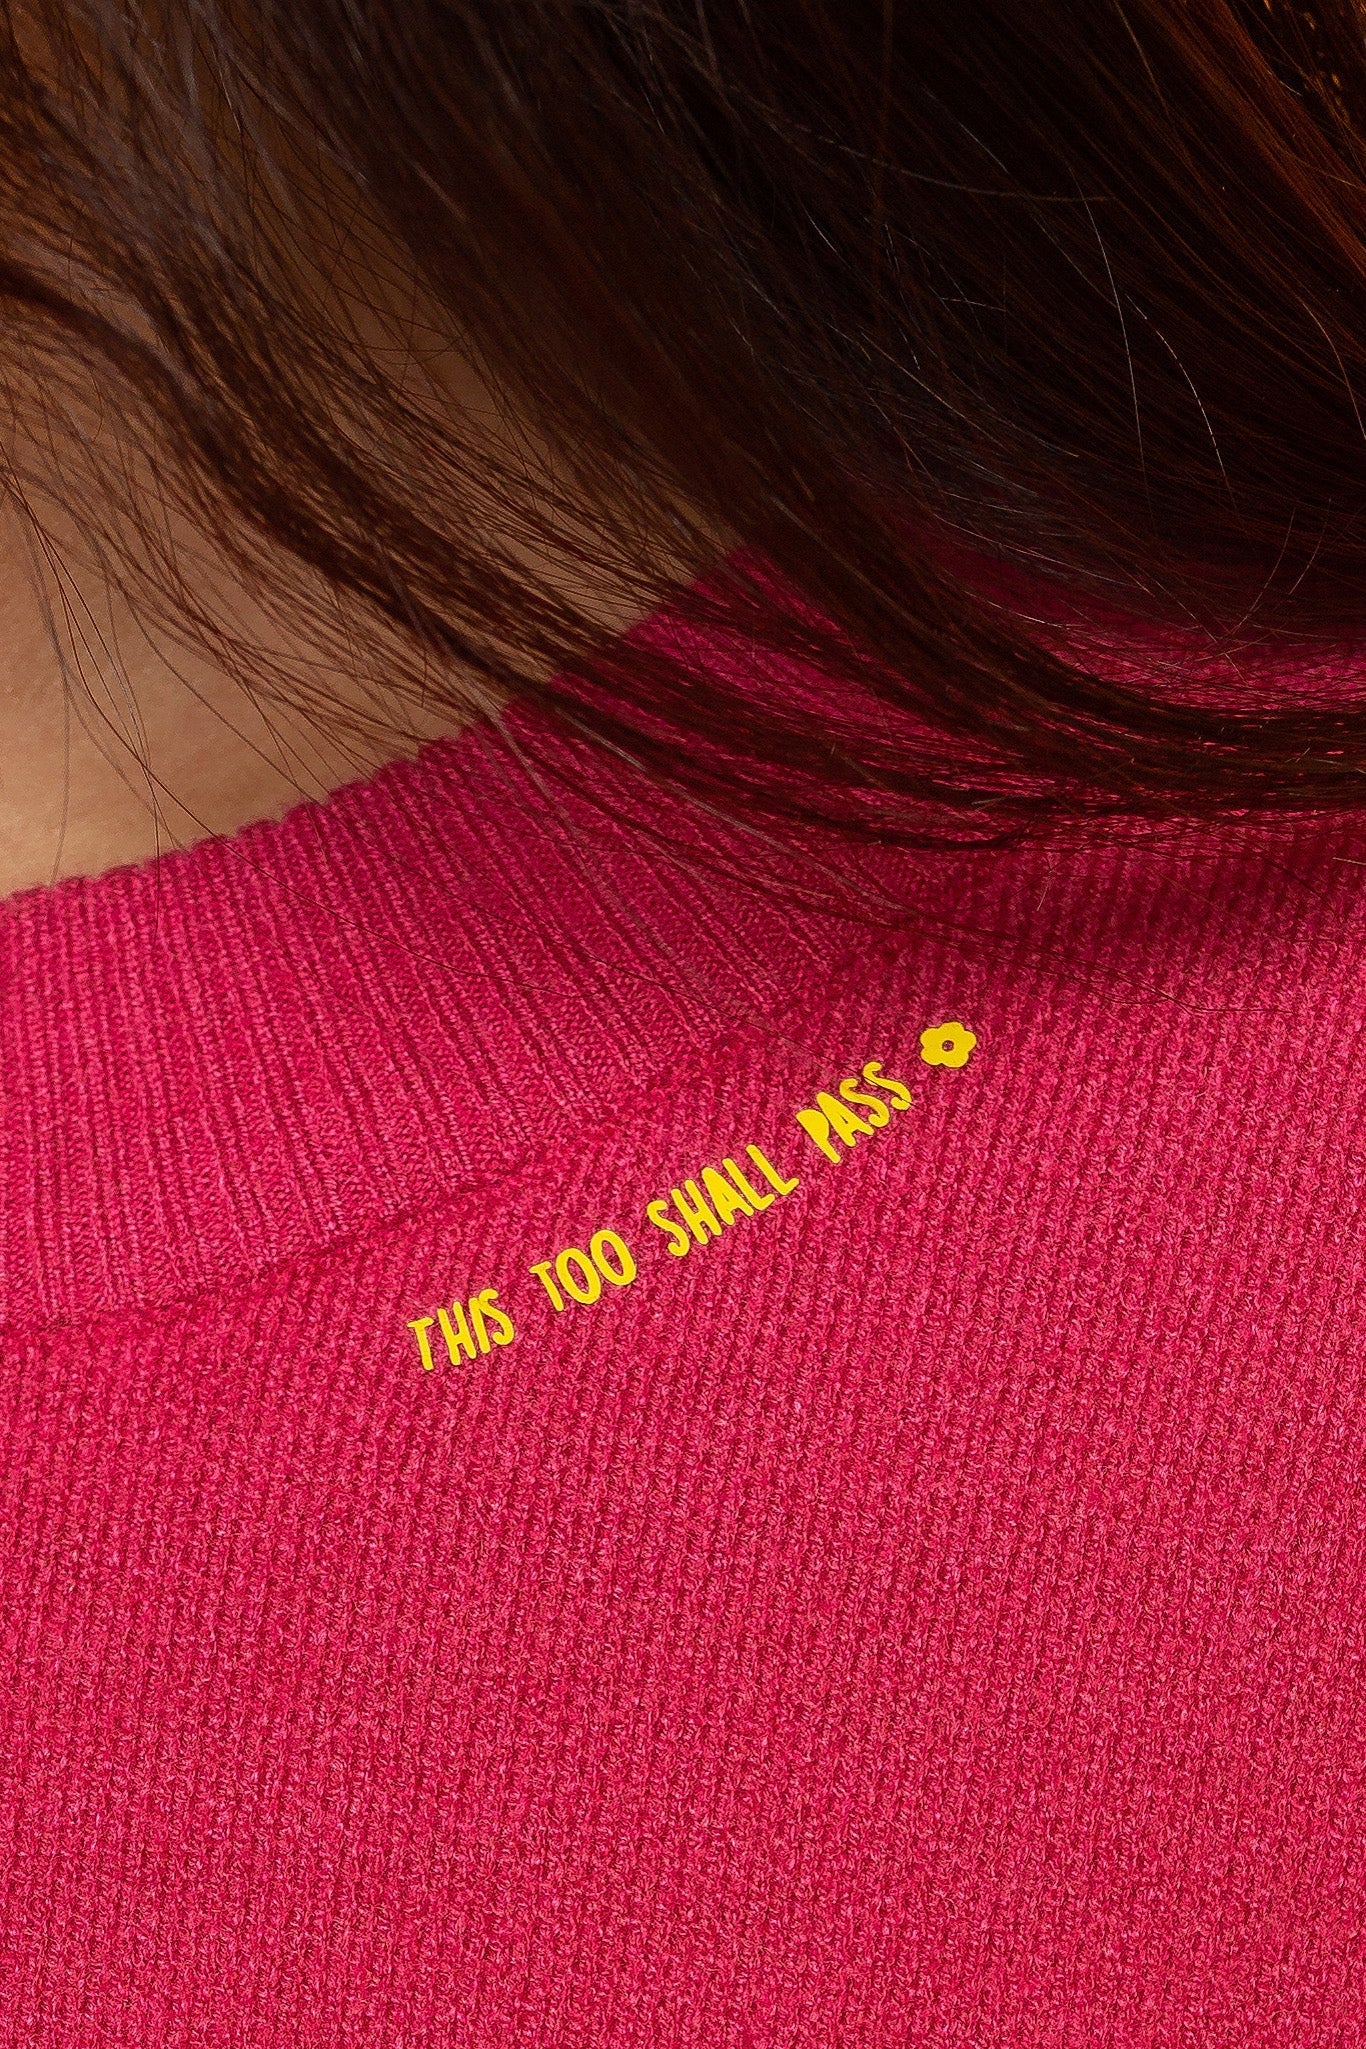 This is The Remix Jumper THIS TOO SHALL PASS - Balloon Sleeve Knitted Jumper In Pink